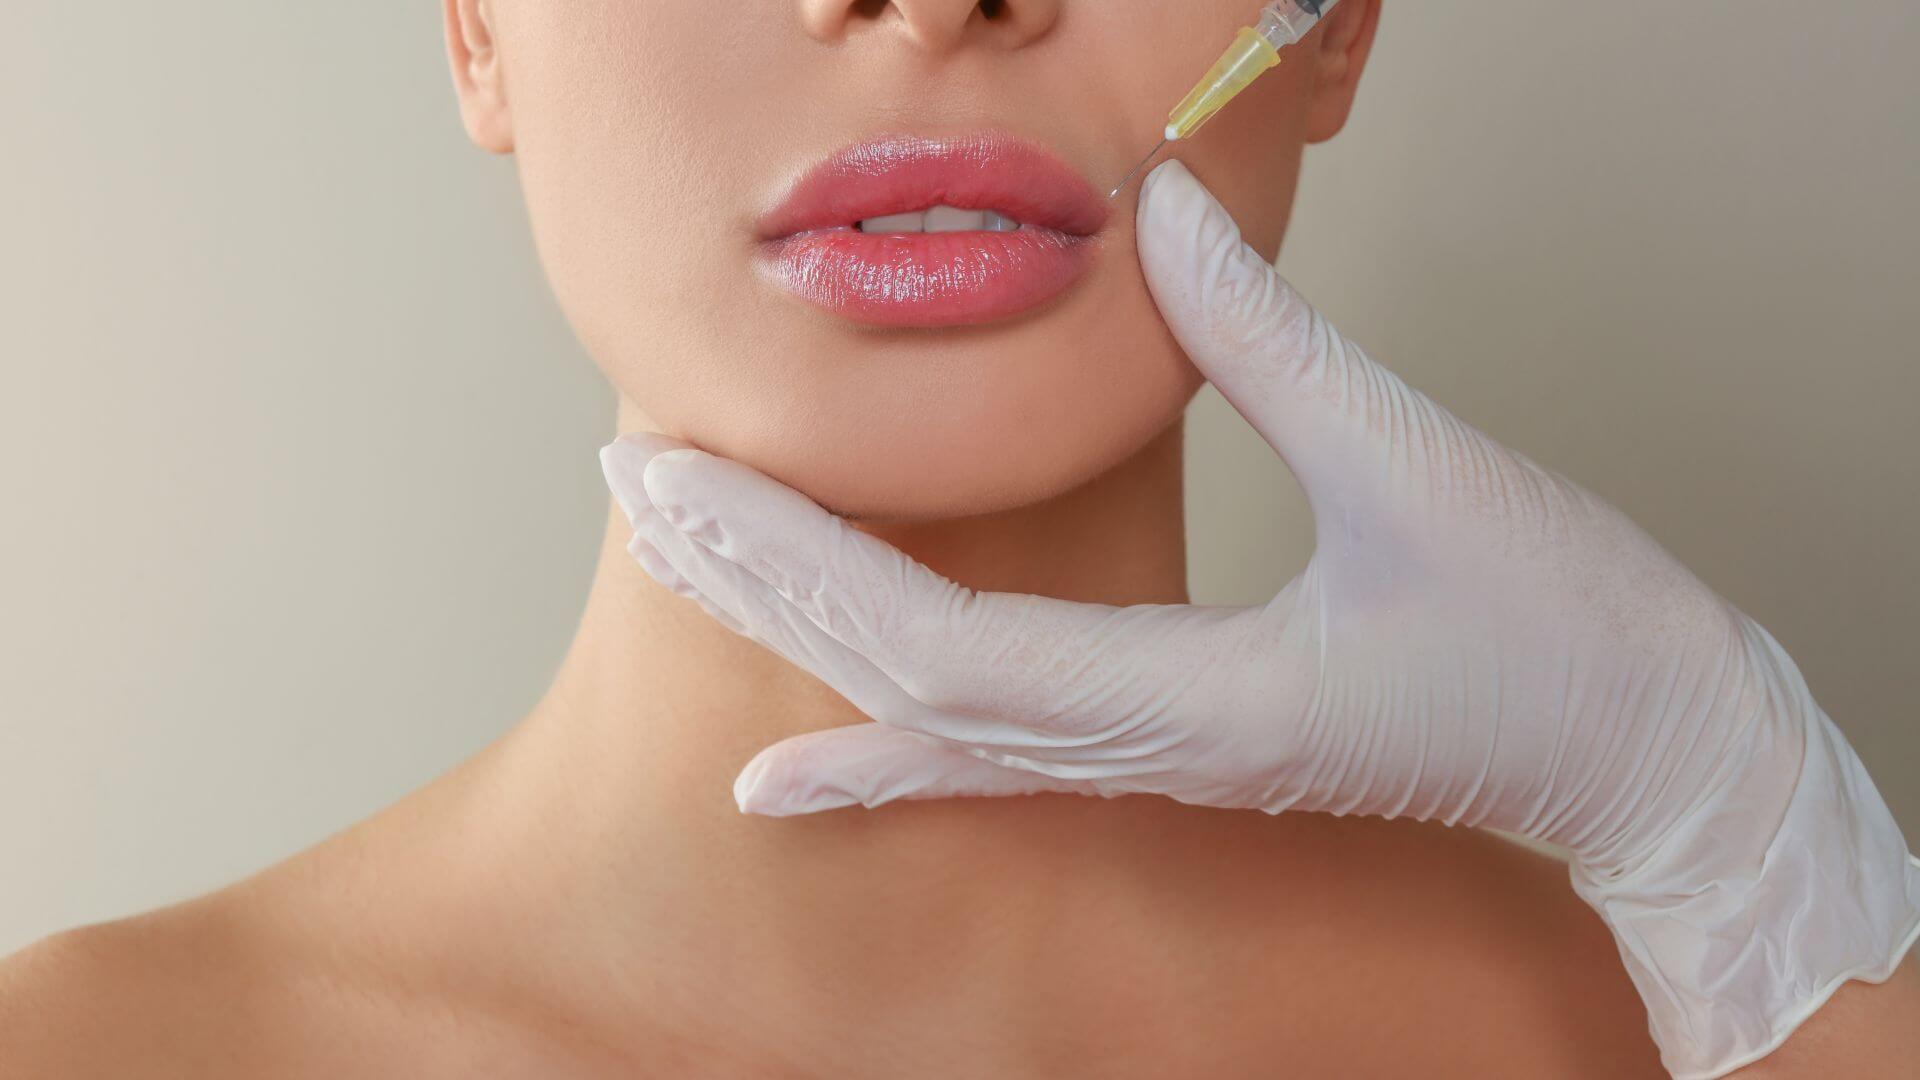 Can Lip Fillers Be Used To Correct Asymmetry